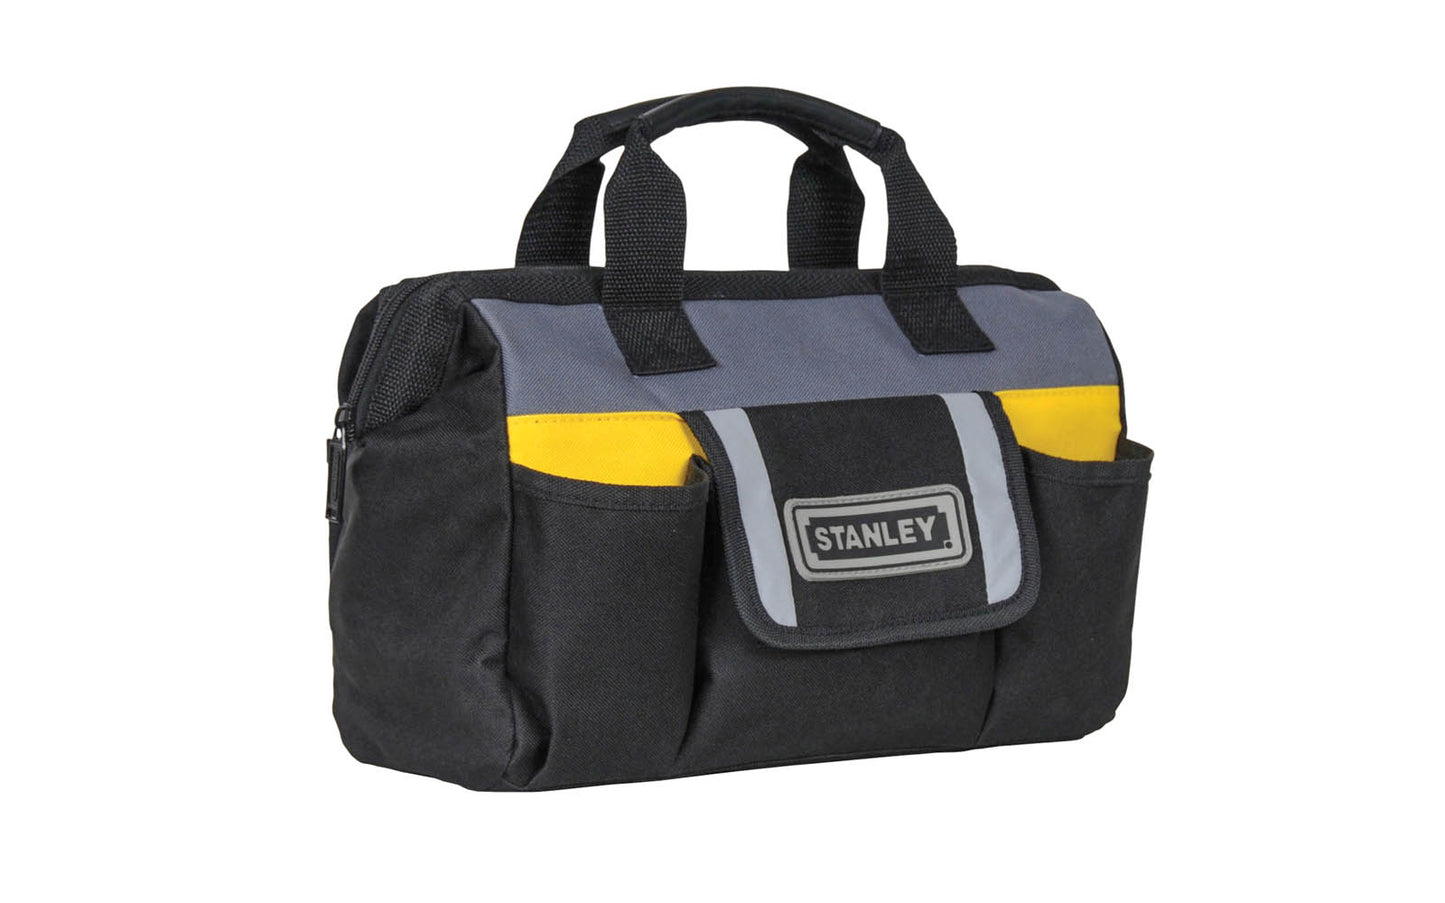 Stanley 12" Tool Bag is ideal for carrying hand tools & the adjustable strap allows for easy access to contents. Durable 600 x 600 denier polyester fabric that is hardwearing & strong. Tool bag is great for carrying various hand tools. Multiple internal & external pockets for organization. Model STST70574. 076174705744